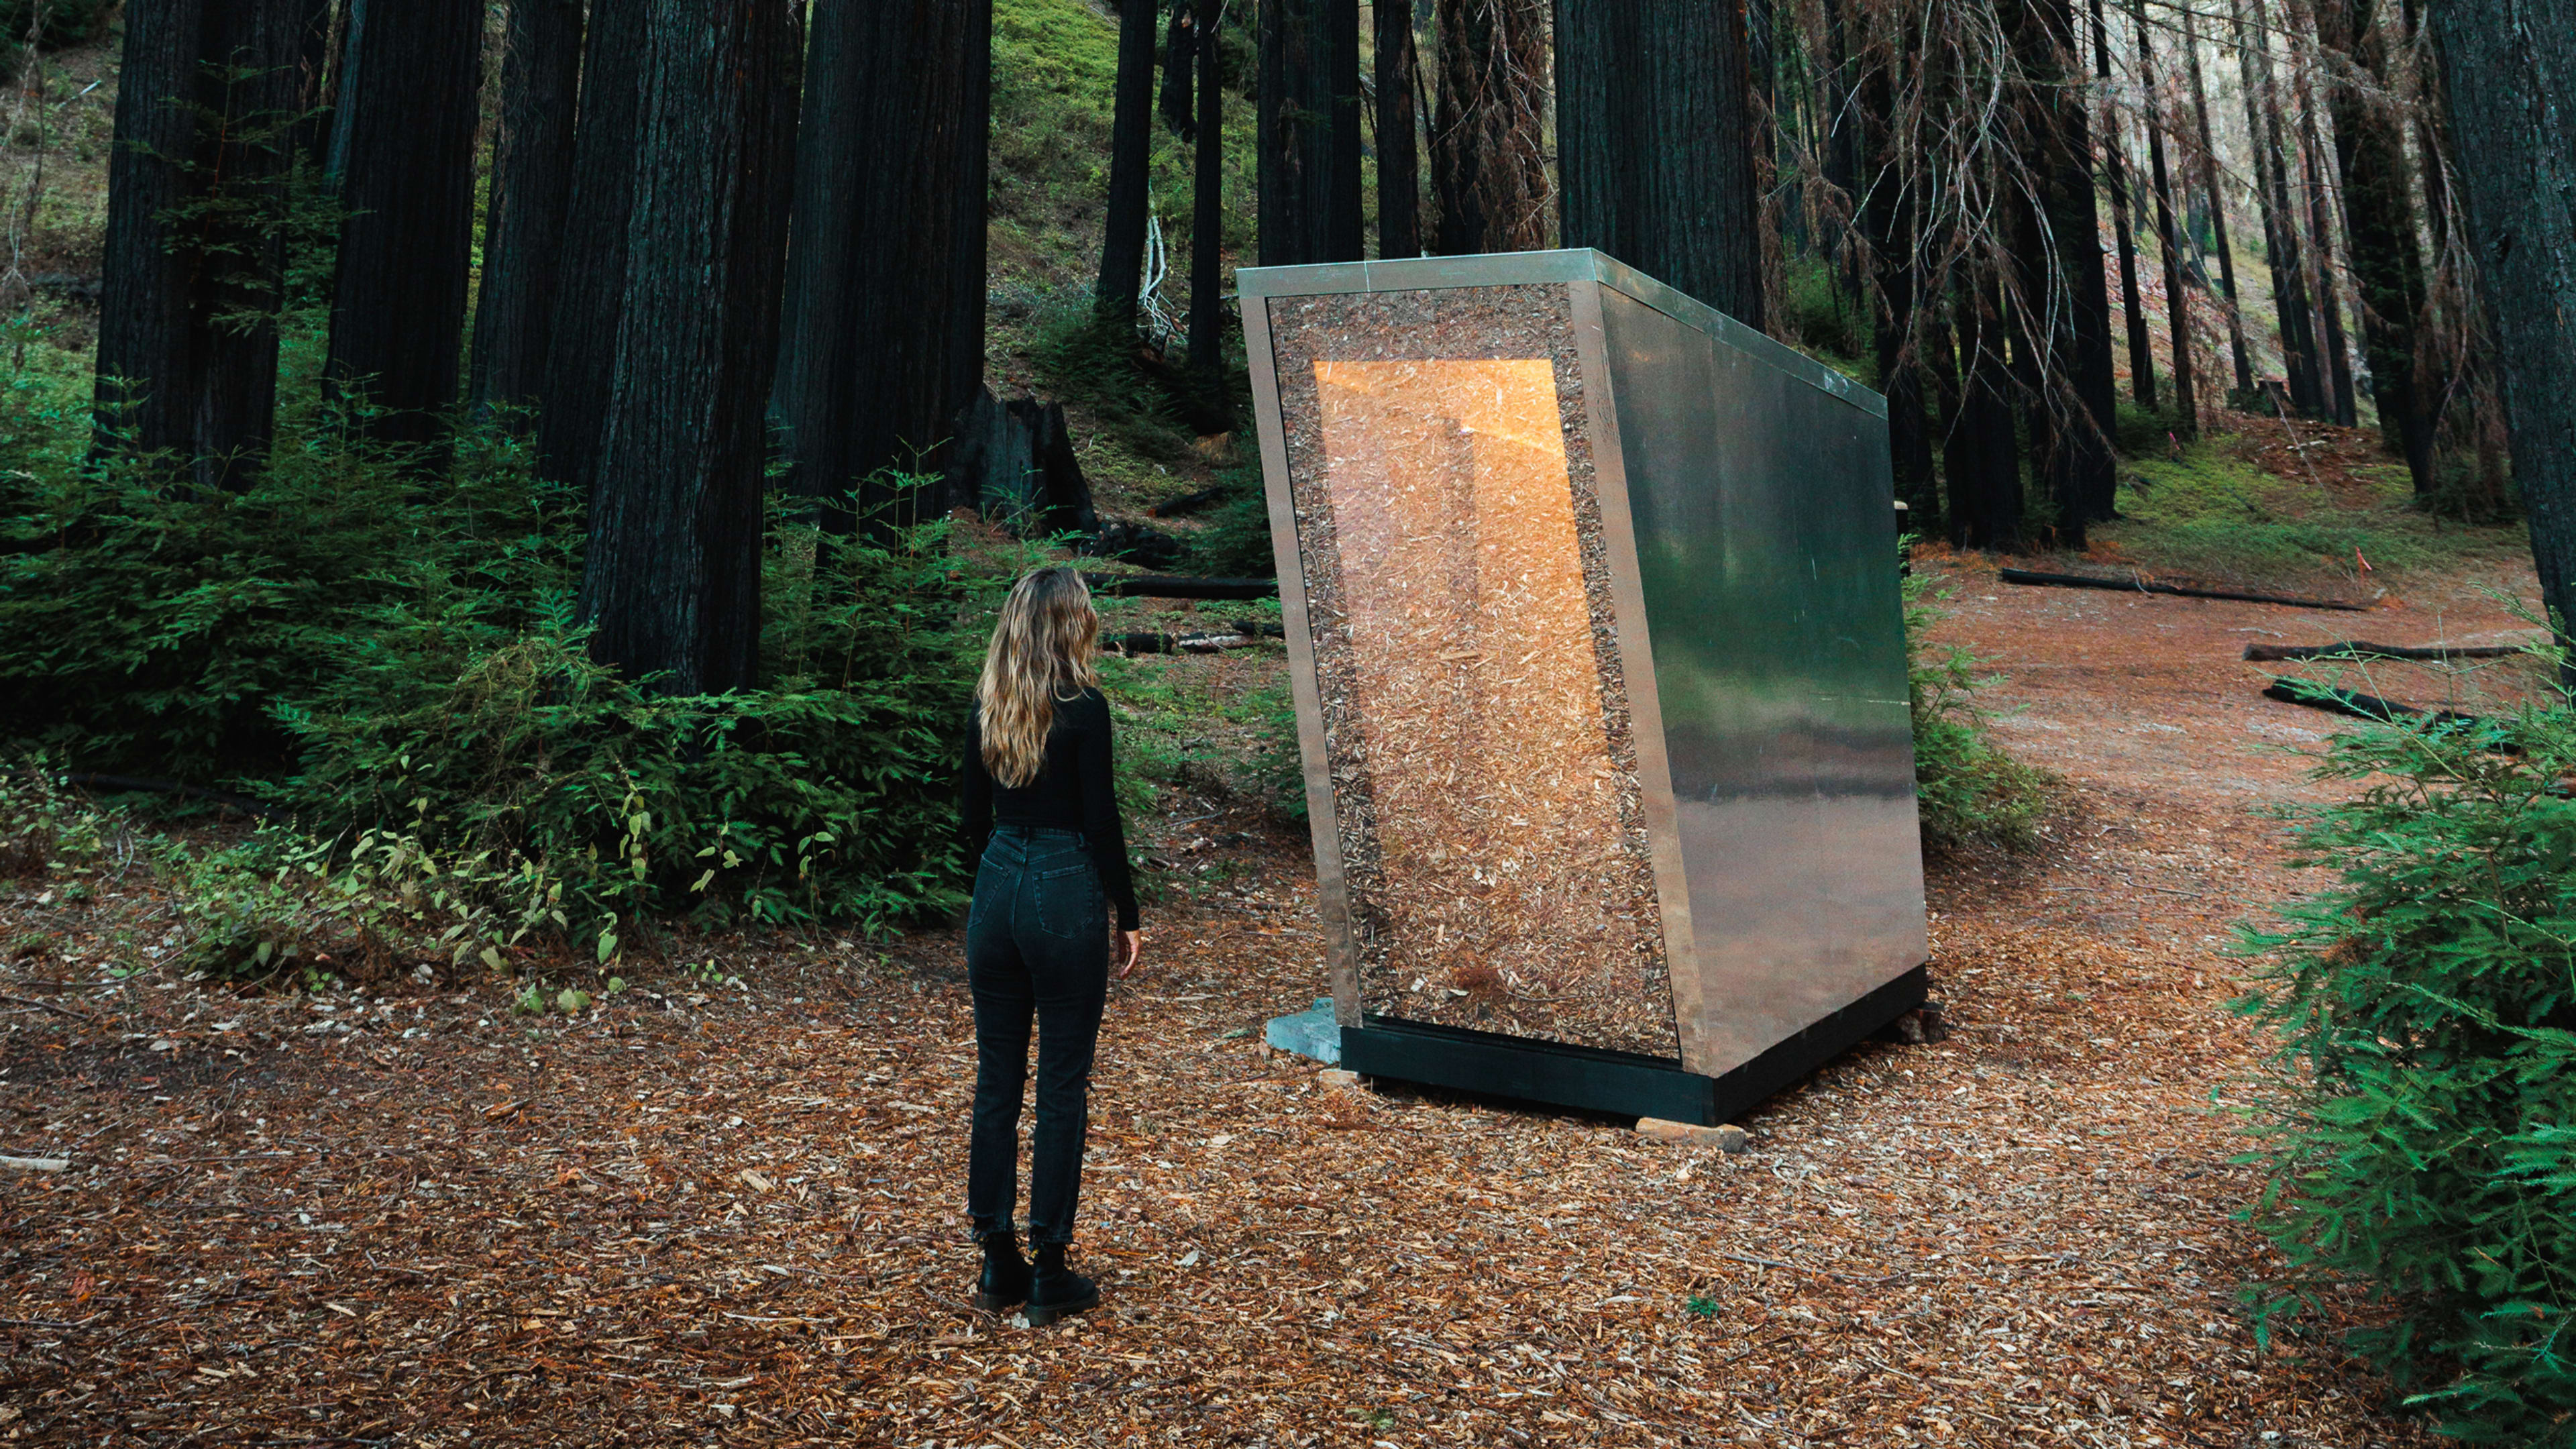 This $5,000 mobile toilet wants to disrupt the porta potty industry